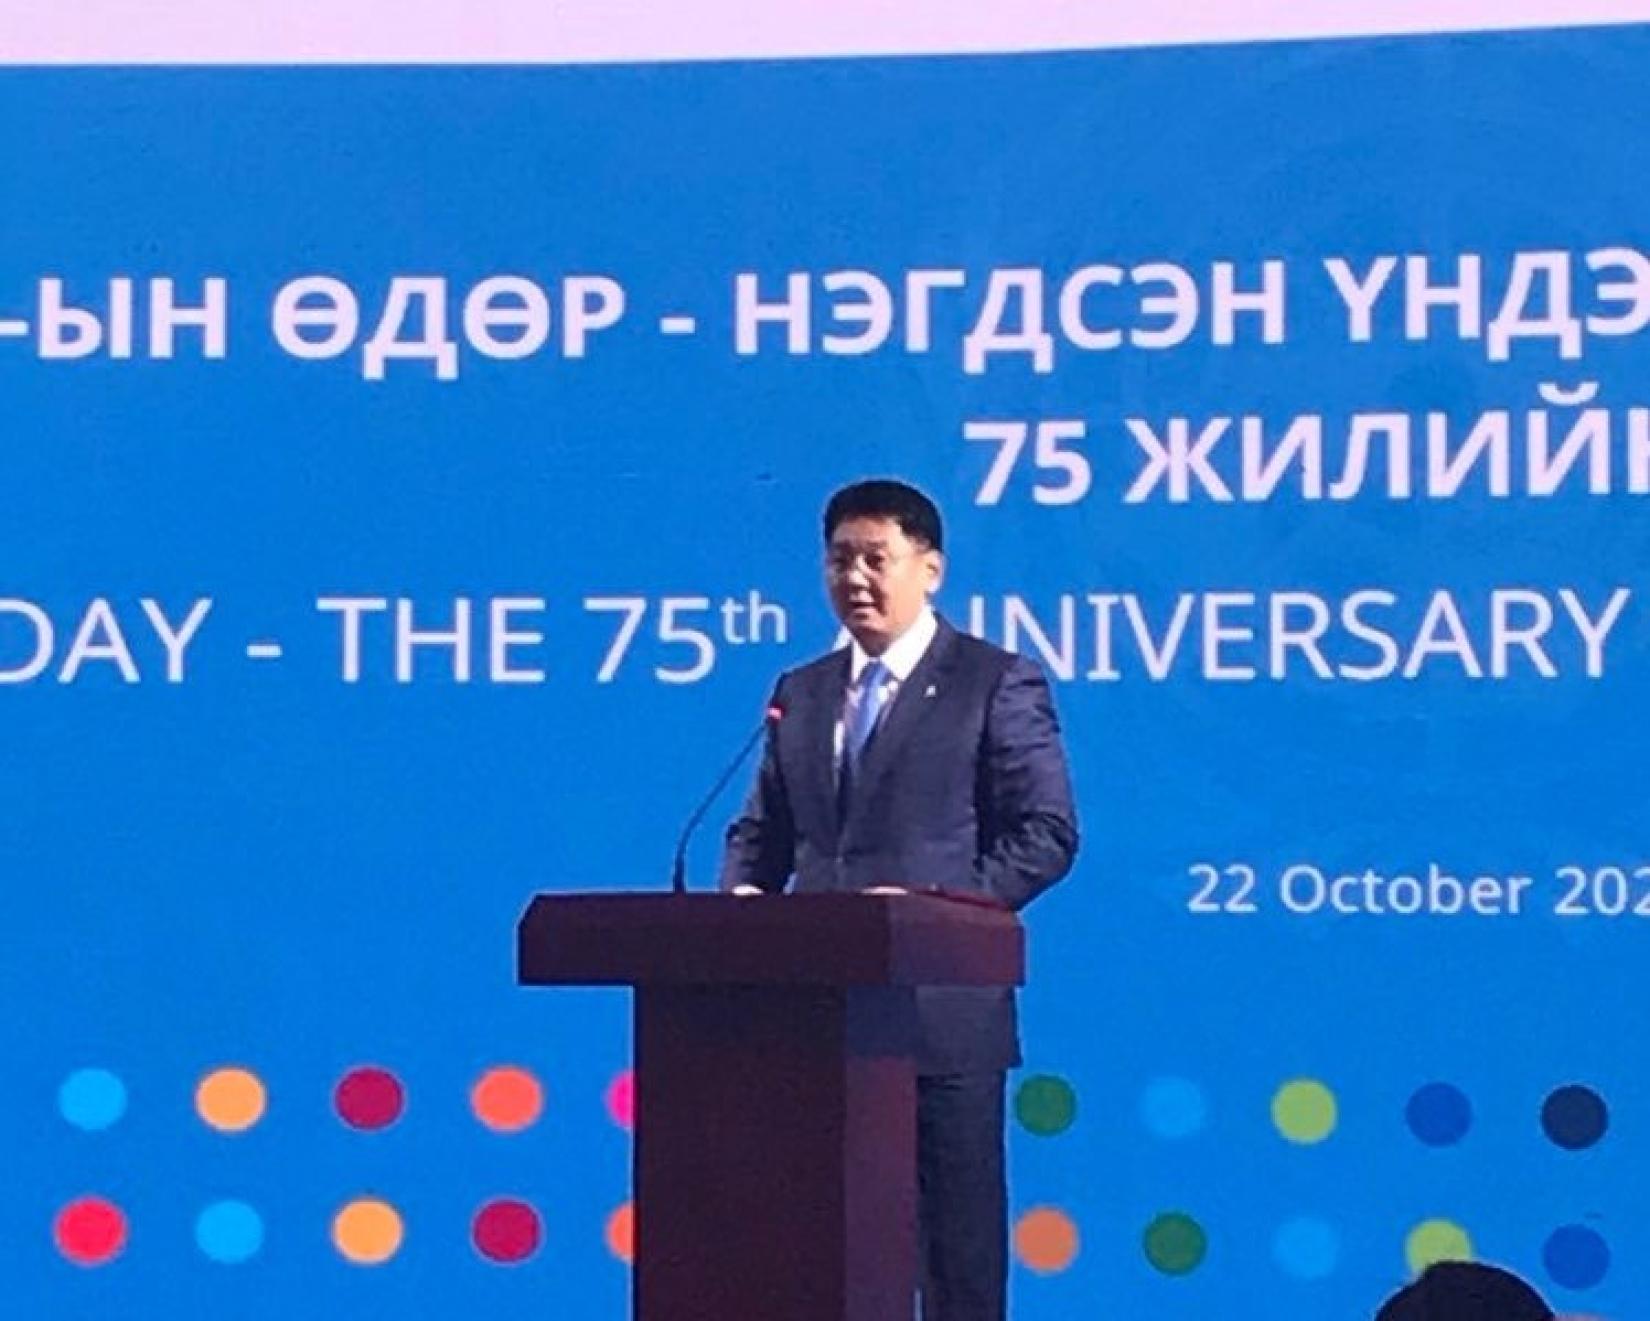 Prime Minister of Mongolia U. Khurelsukh participated in UN Day event